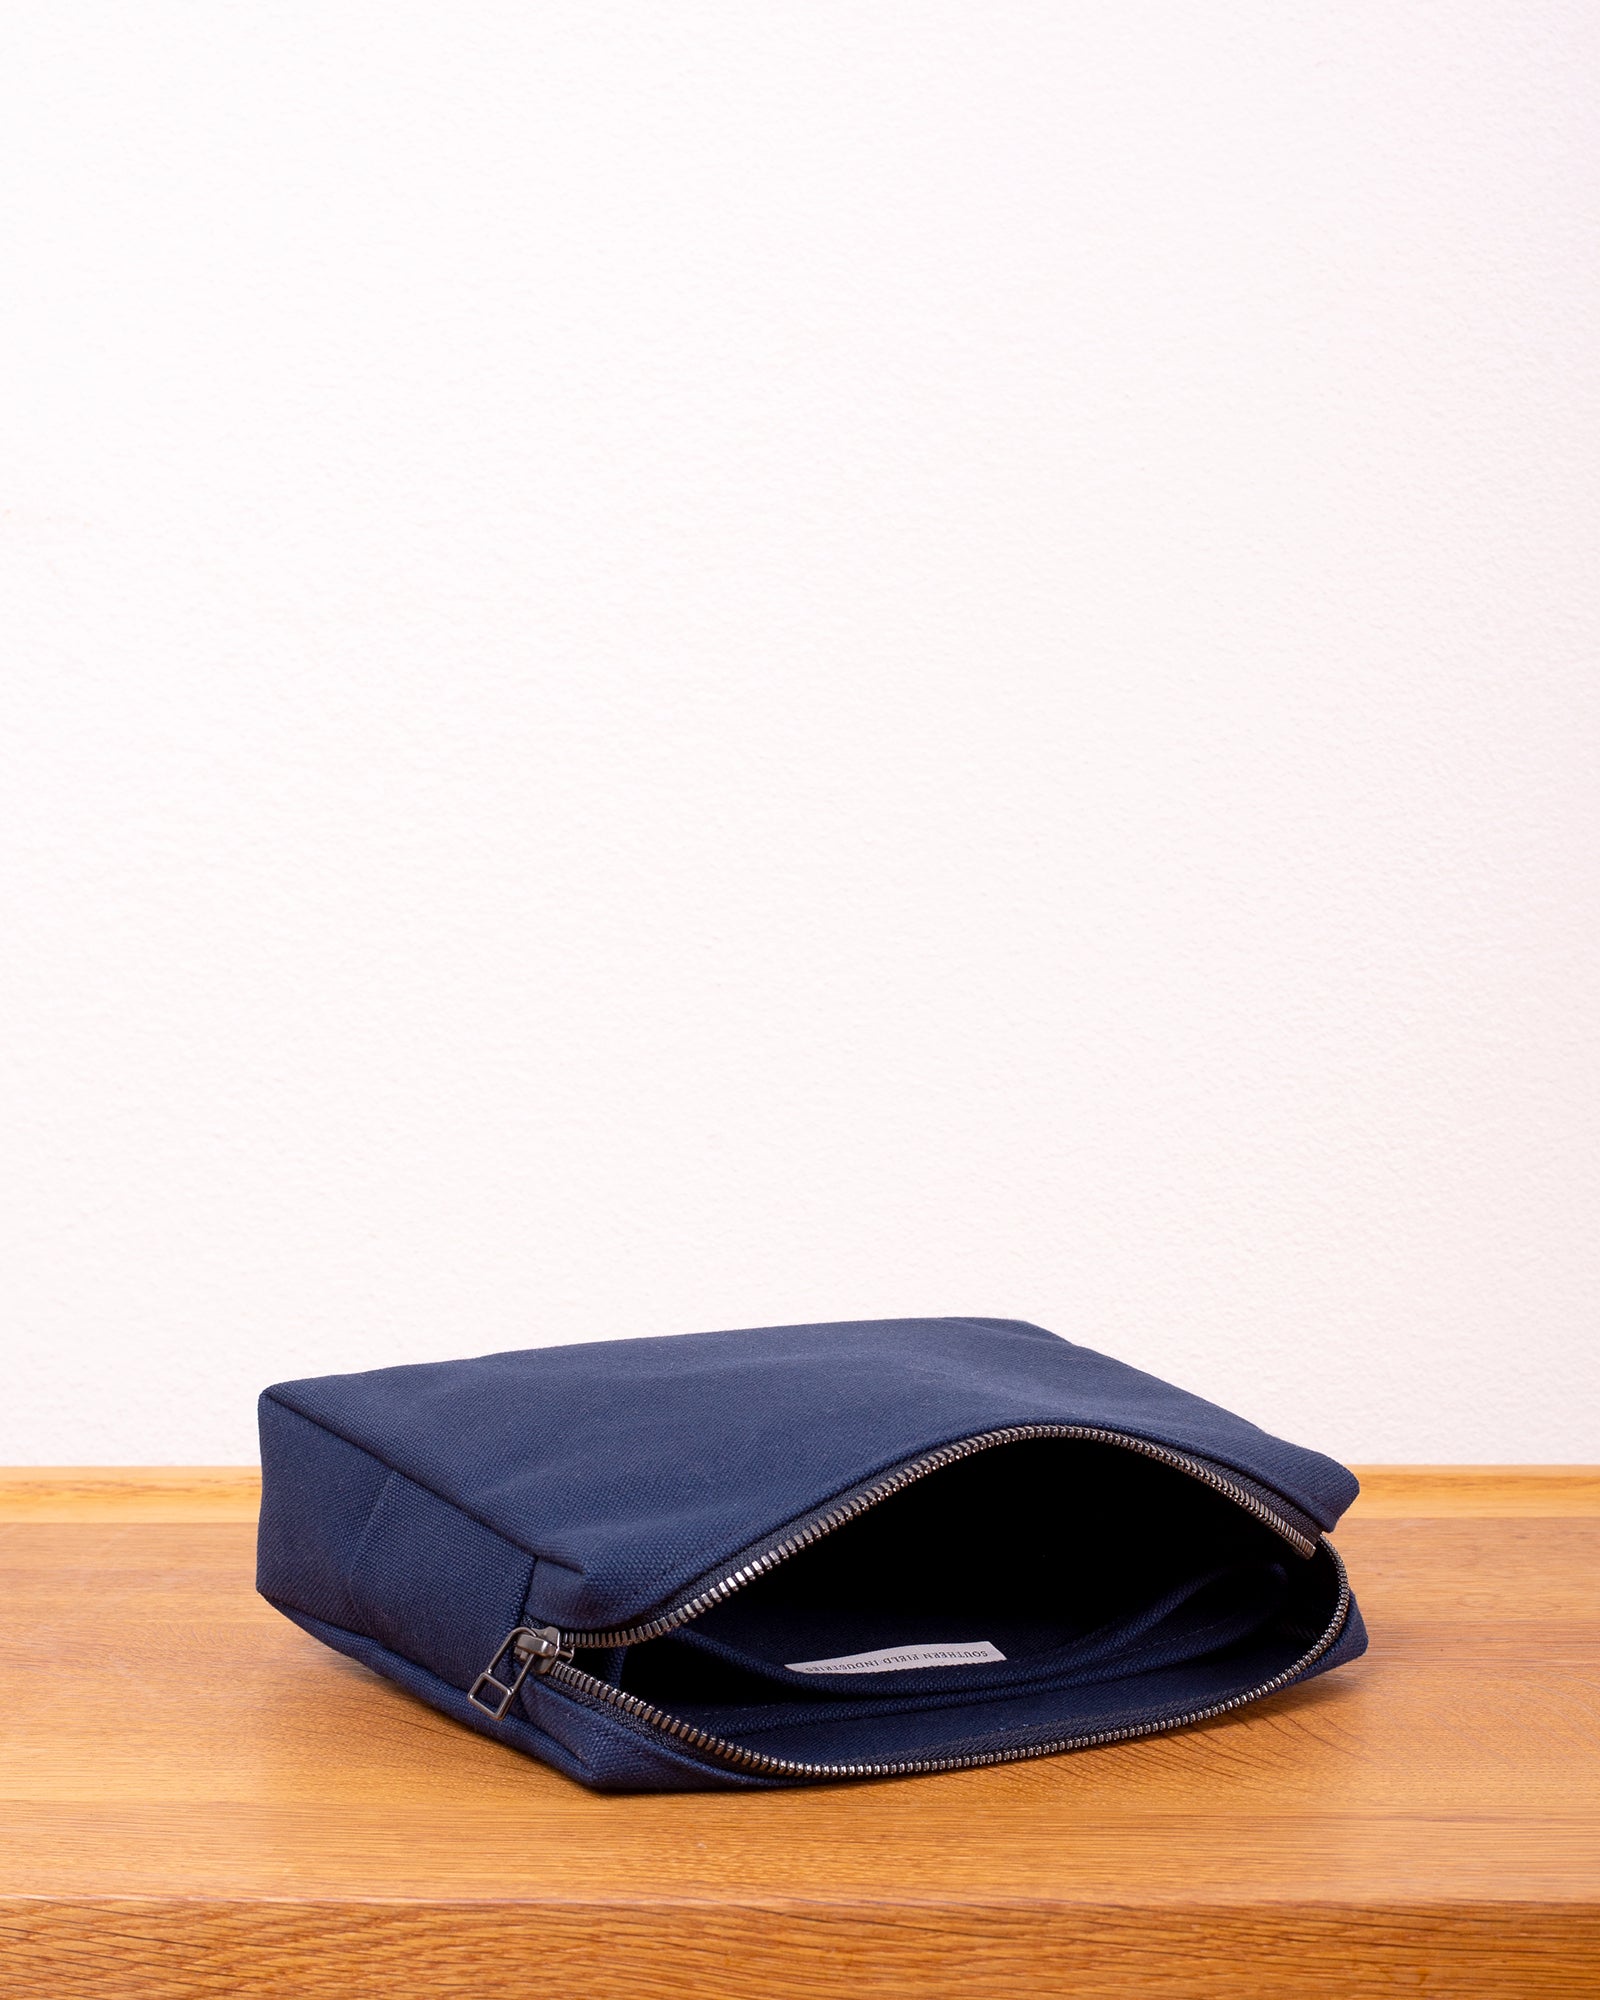 UTILITY POUCH 240 - Navy